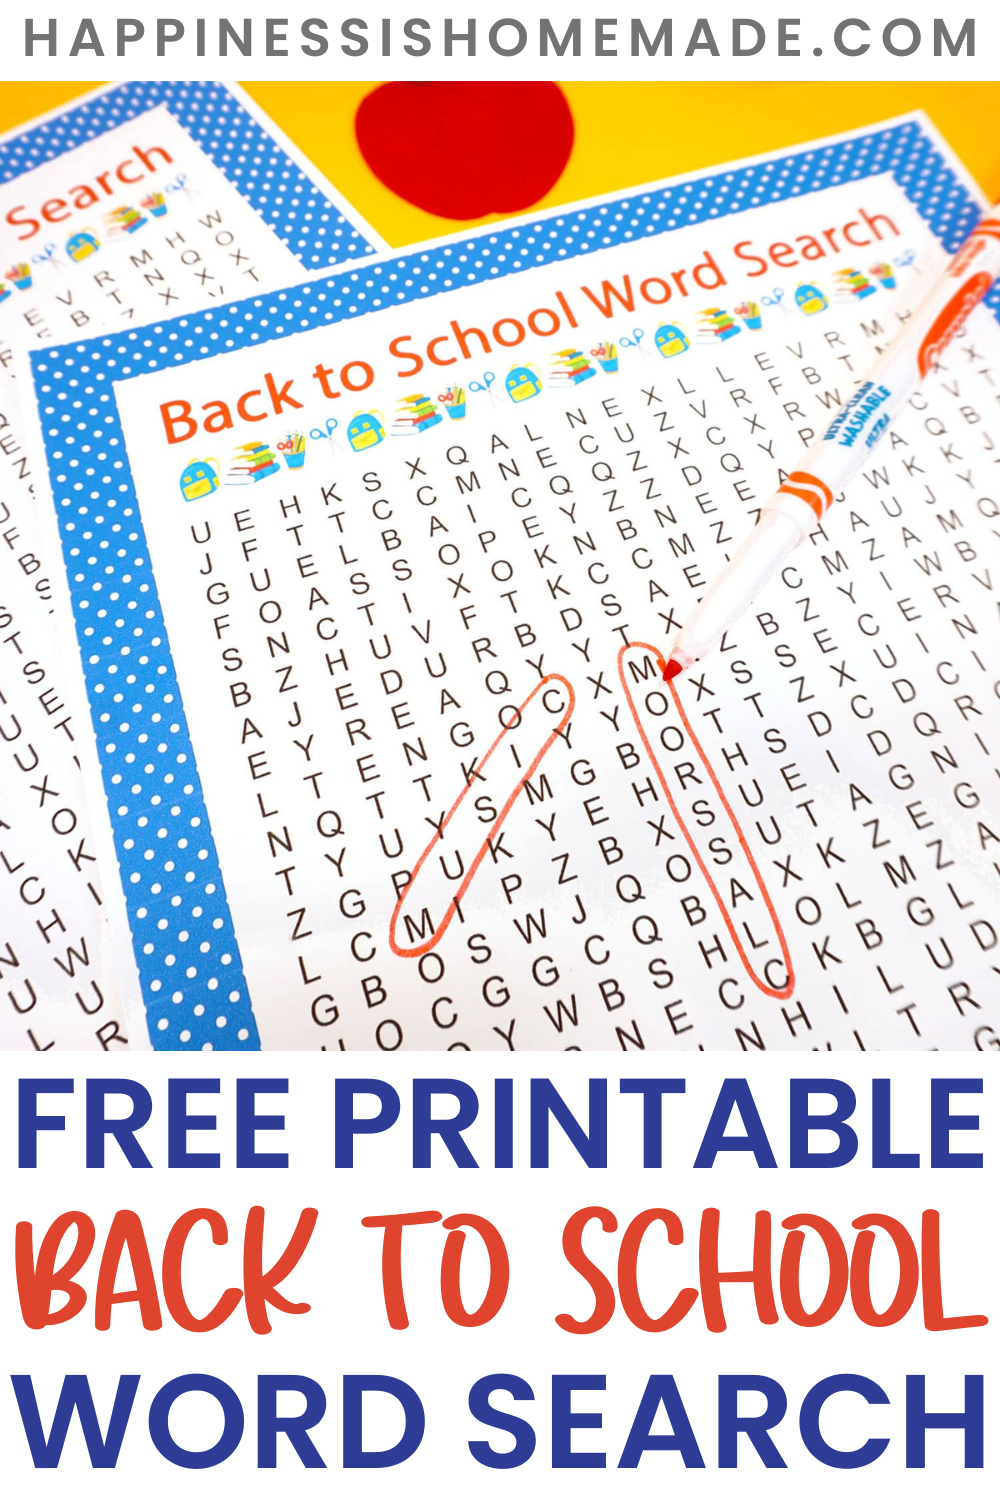 Free printable back to school word search